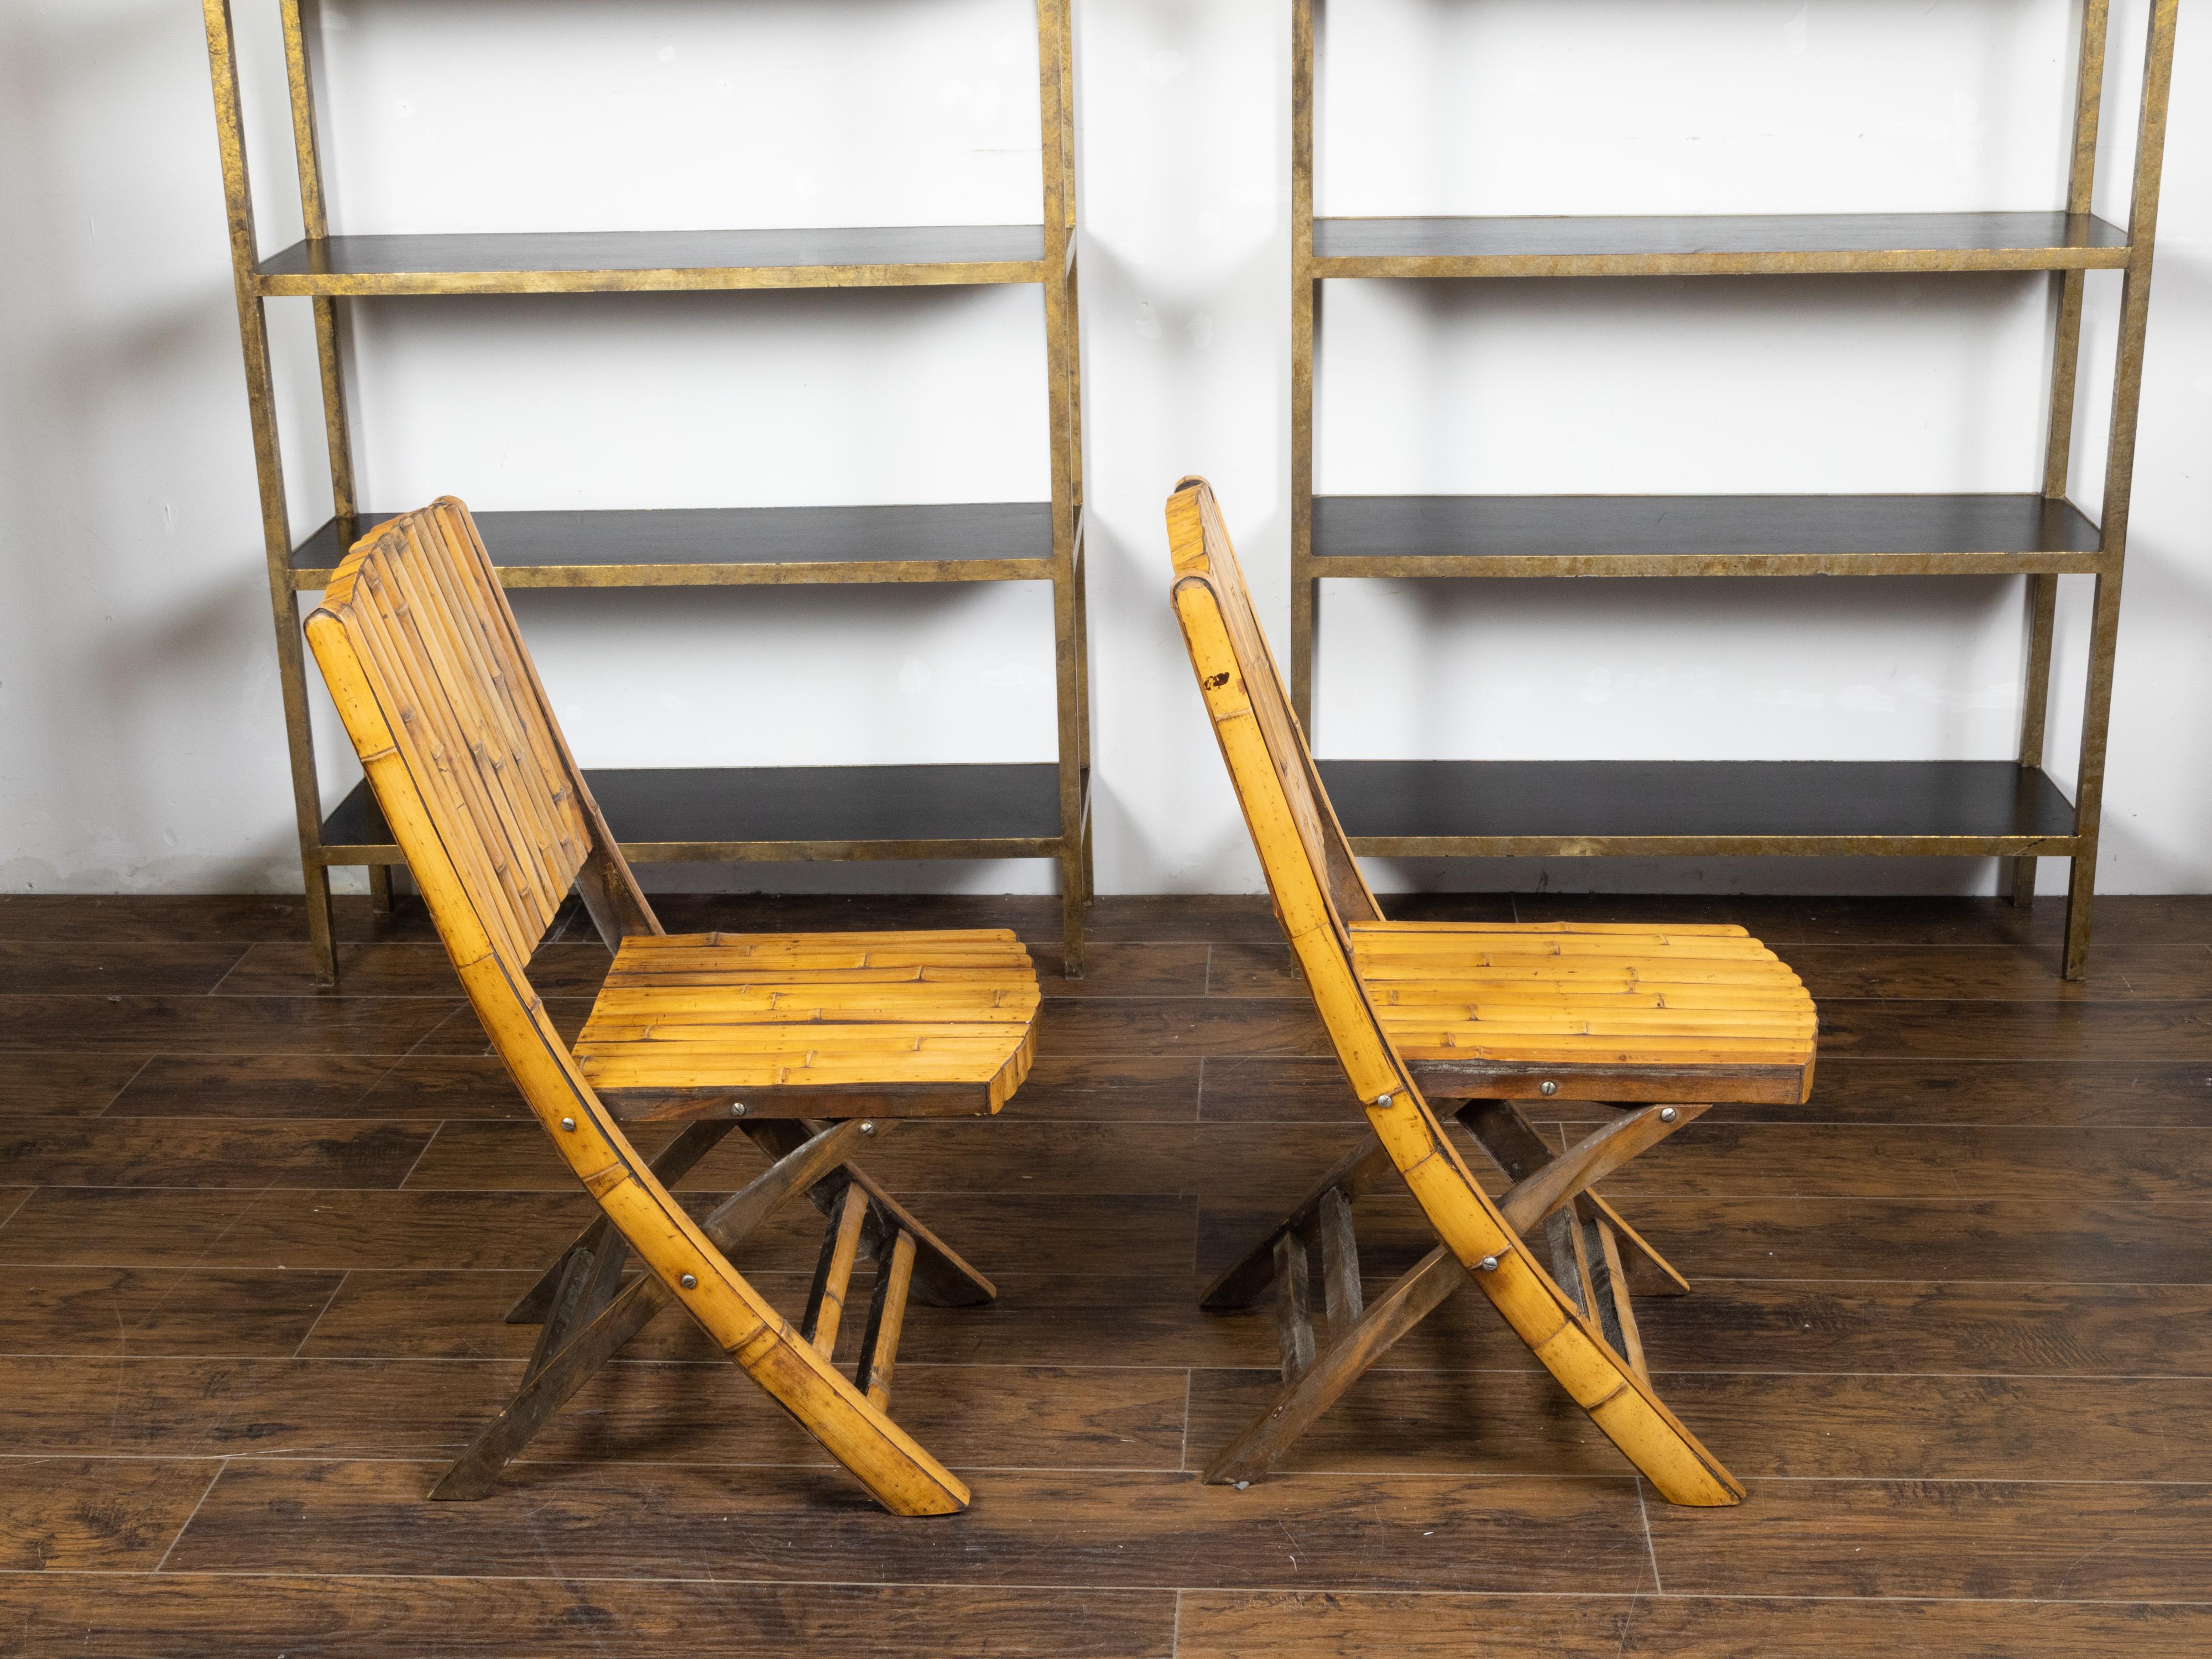 Pair of Midcentury Bamboo Folding Chairs with Slatted Design and Light Patina For Sale 1